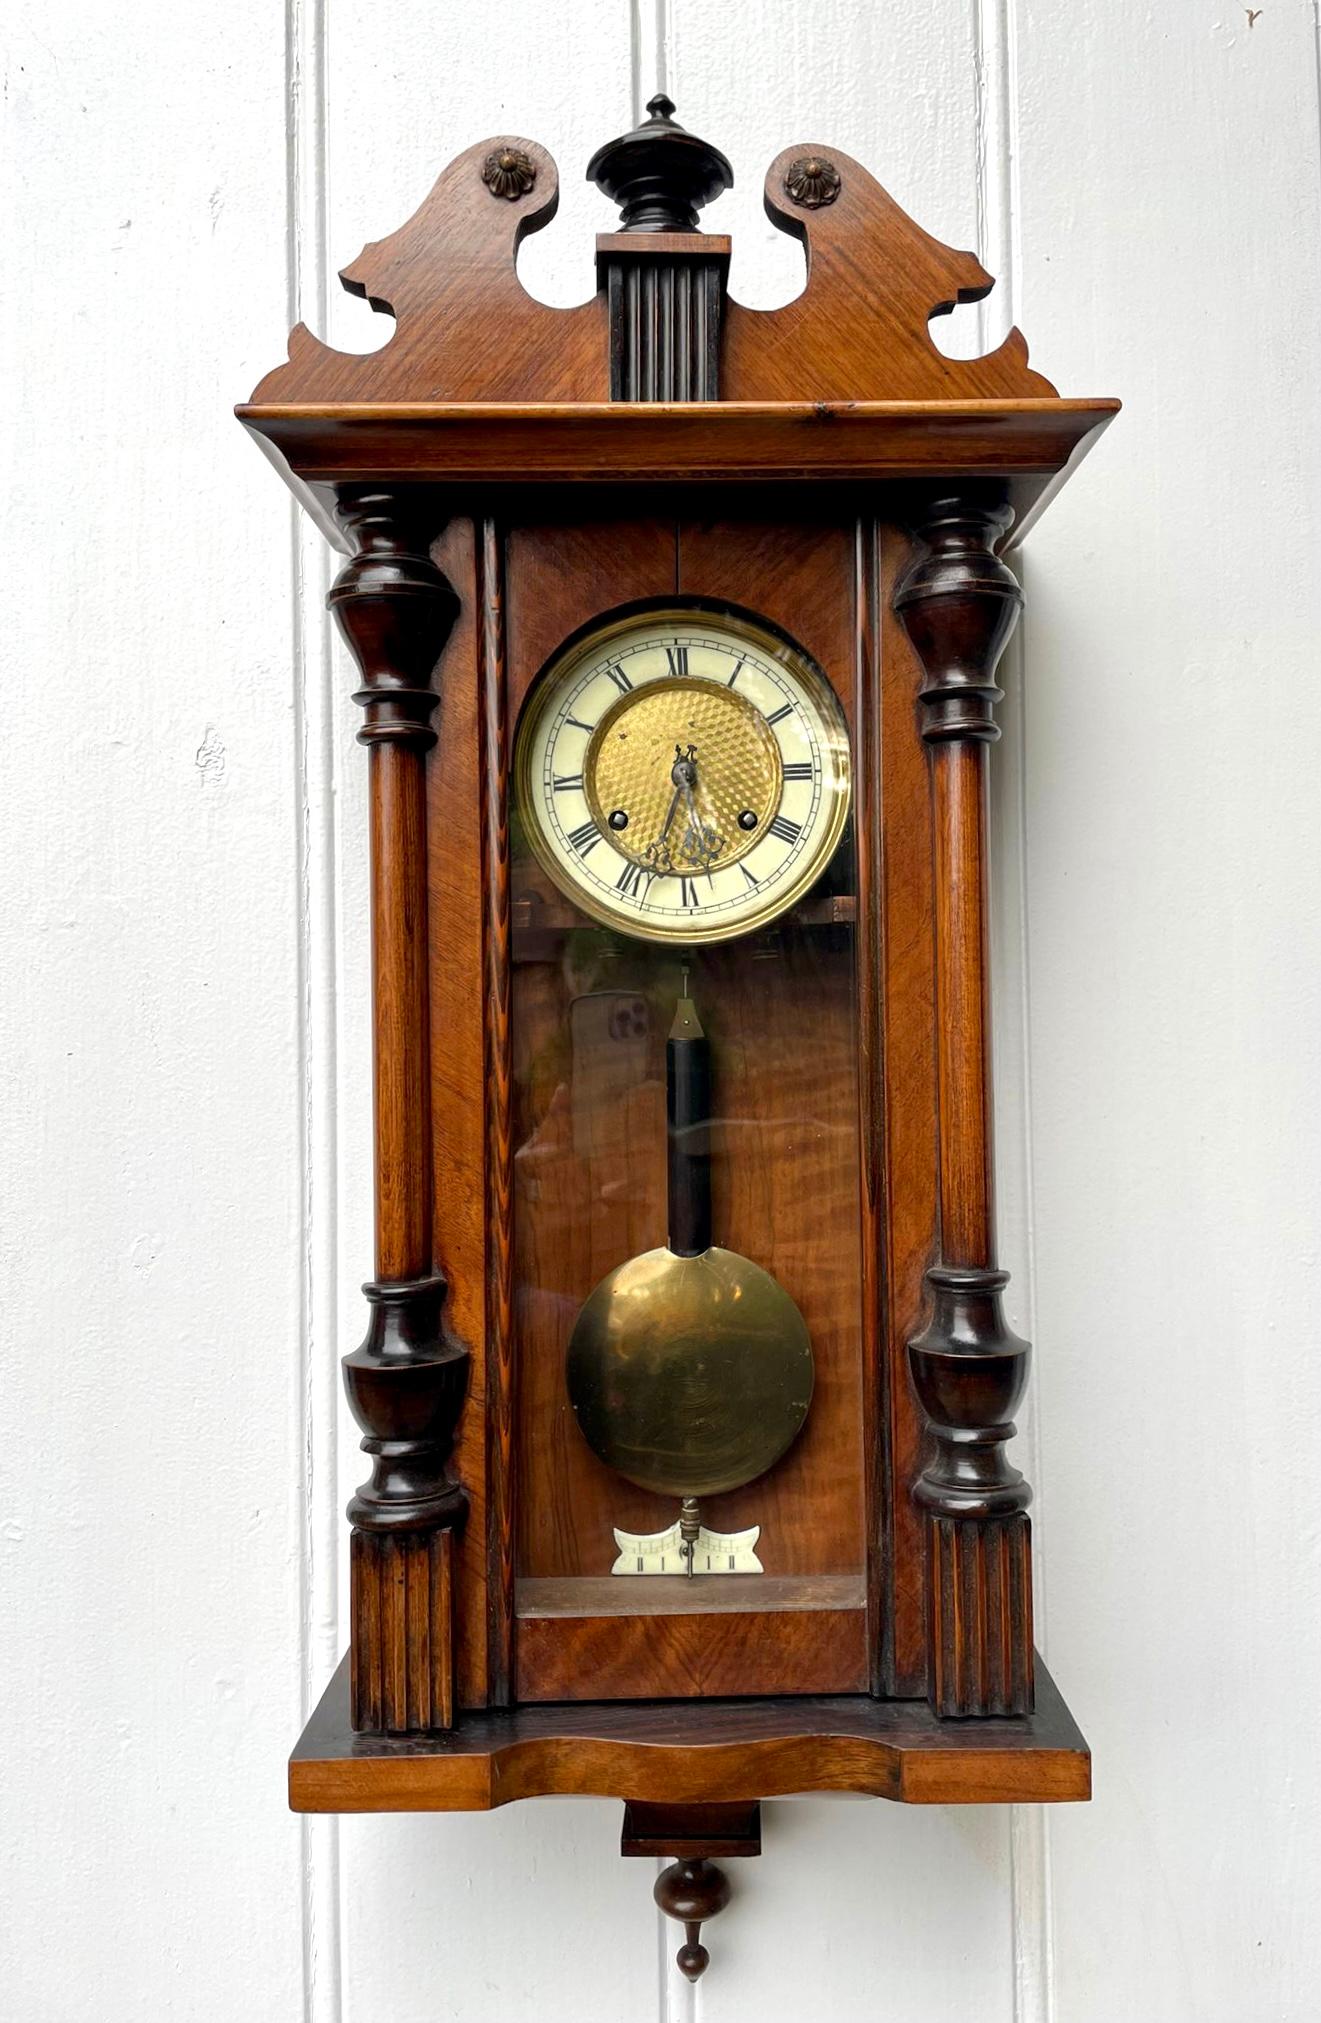 Antique Victorian walnut Vienna wall clock having a shaped swan neck top and a superb quality walnut case with turned columns and original finals, eight day striking movement on the hour and half hour on a gong, round dial with original hands and